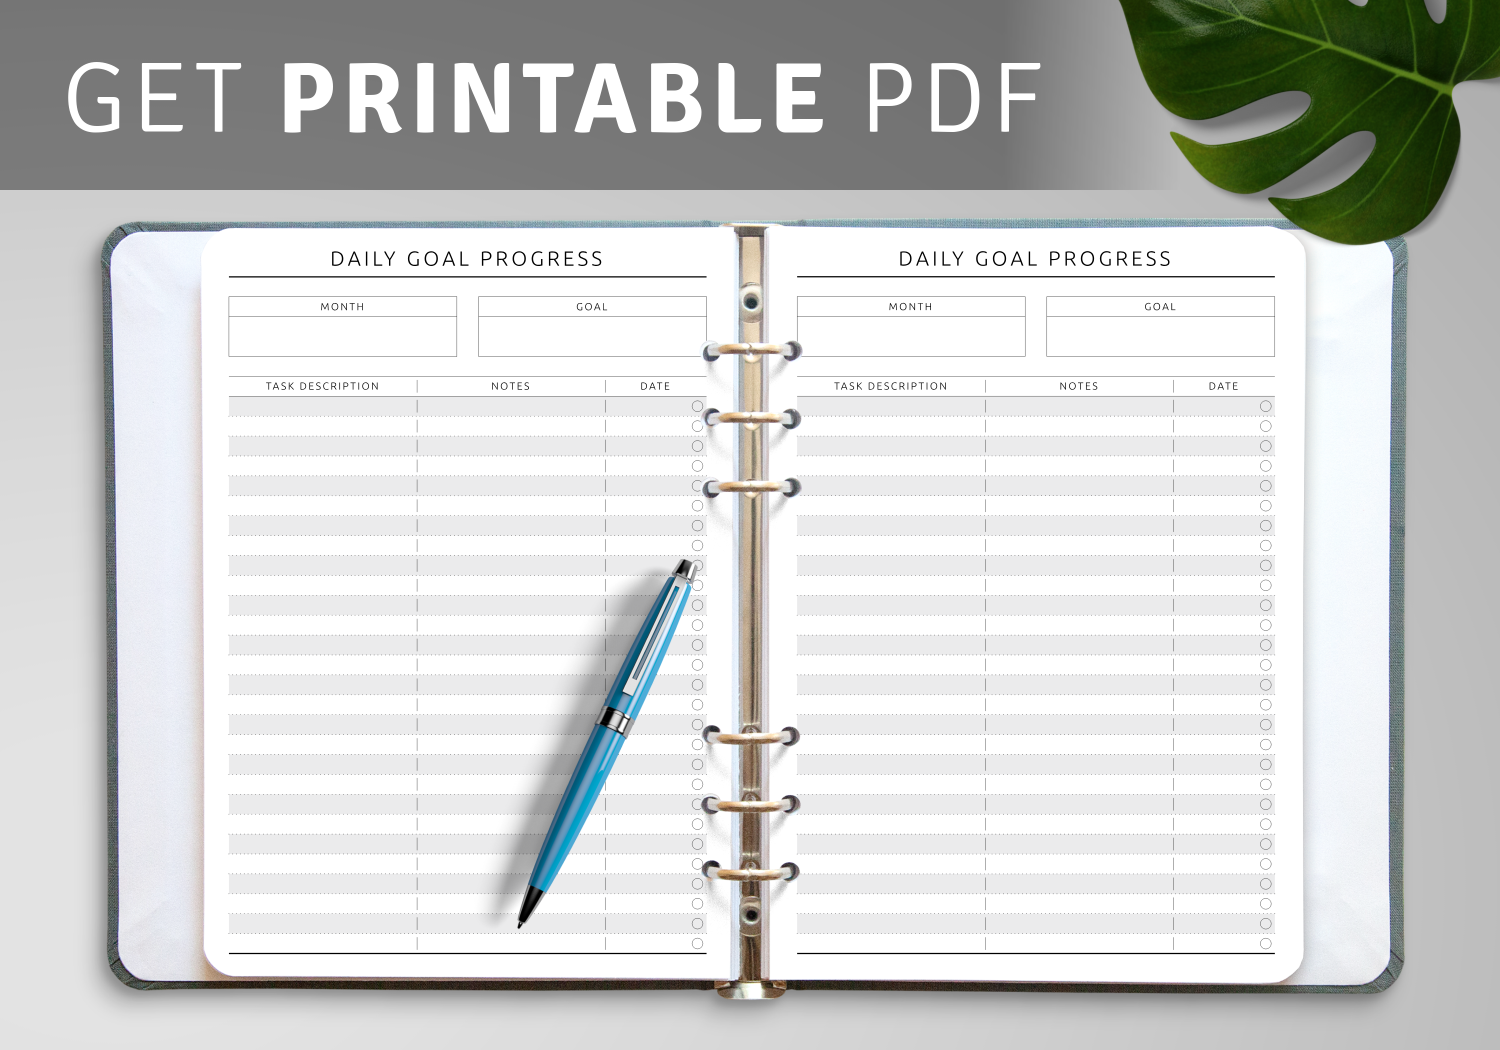 Download Printable Daily Goal Progress PDF Intended For Daily Progress Note Template